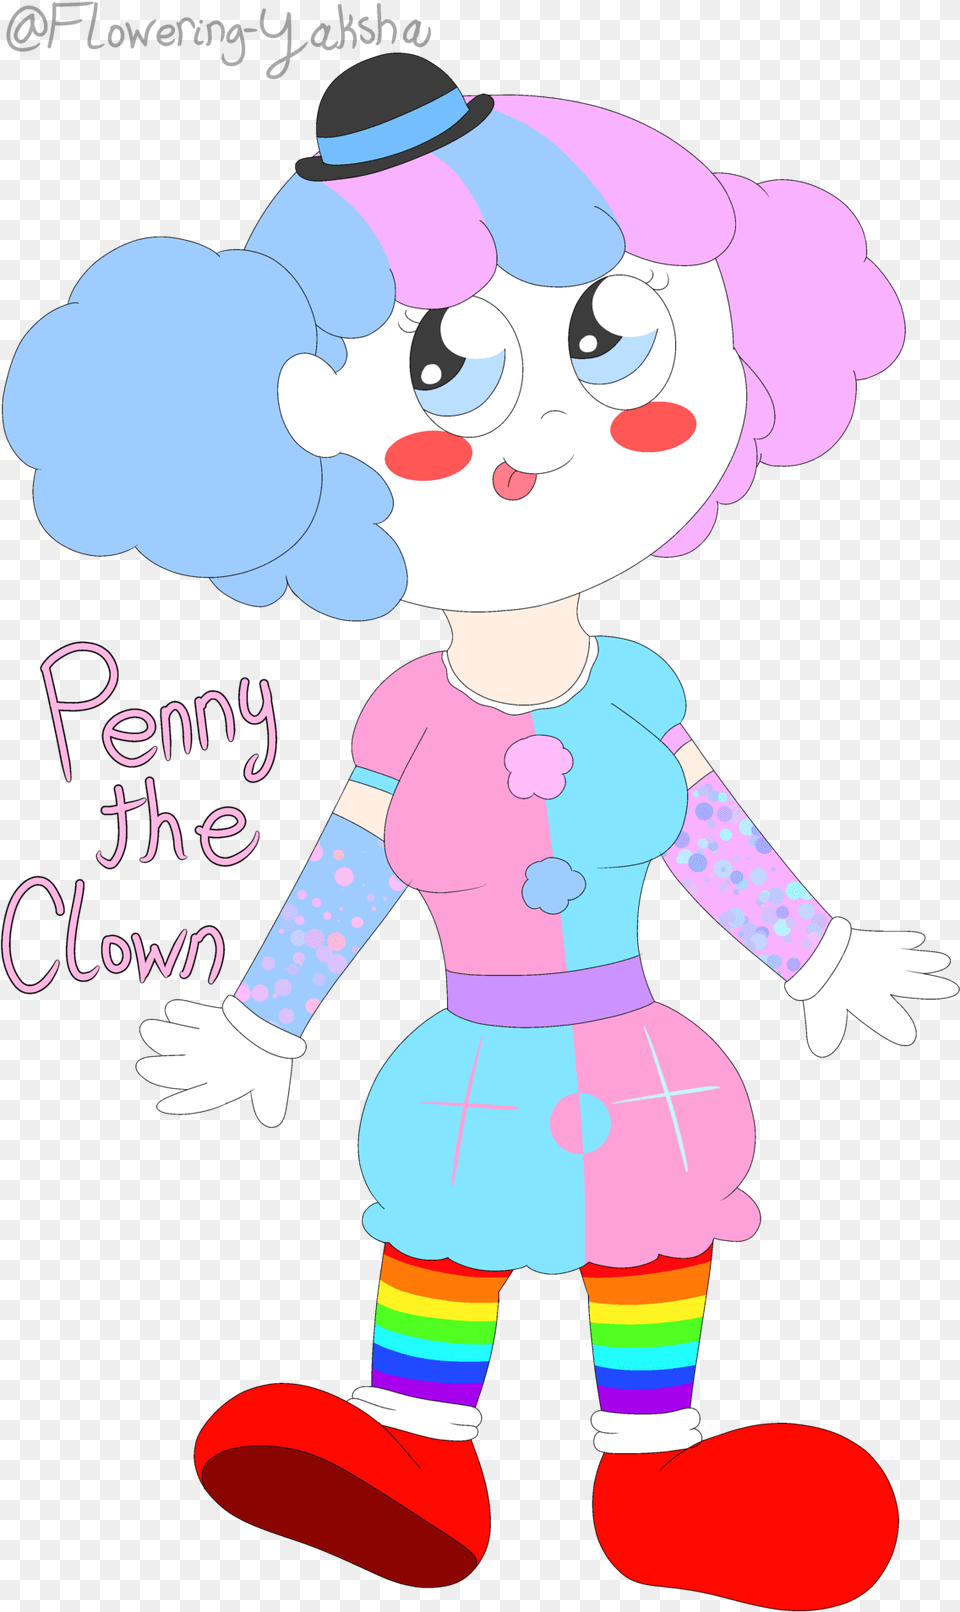 Clown Oc Original Character Penny Penny The Clown Cute Cartoon, Baby, Person, Performer, Face Png